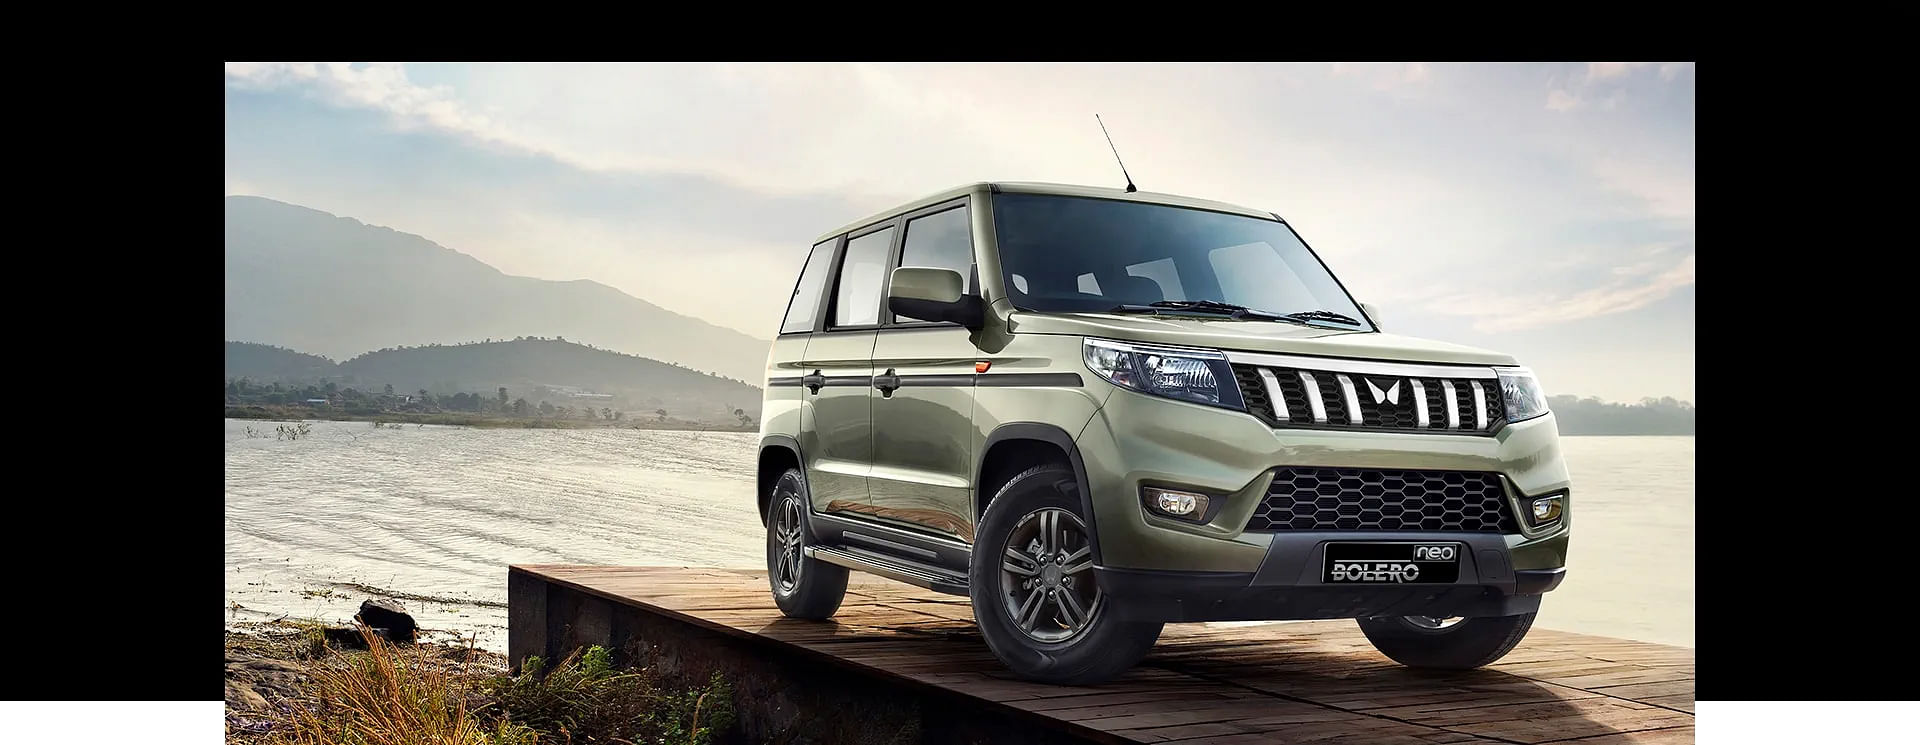 Mahindra Bolero, Priced From Rs 9 Lakh, Gets Dual Airbags As